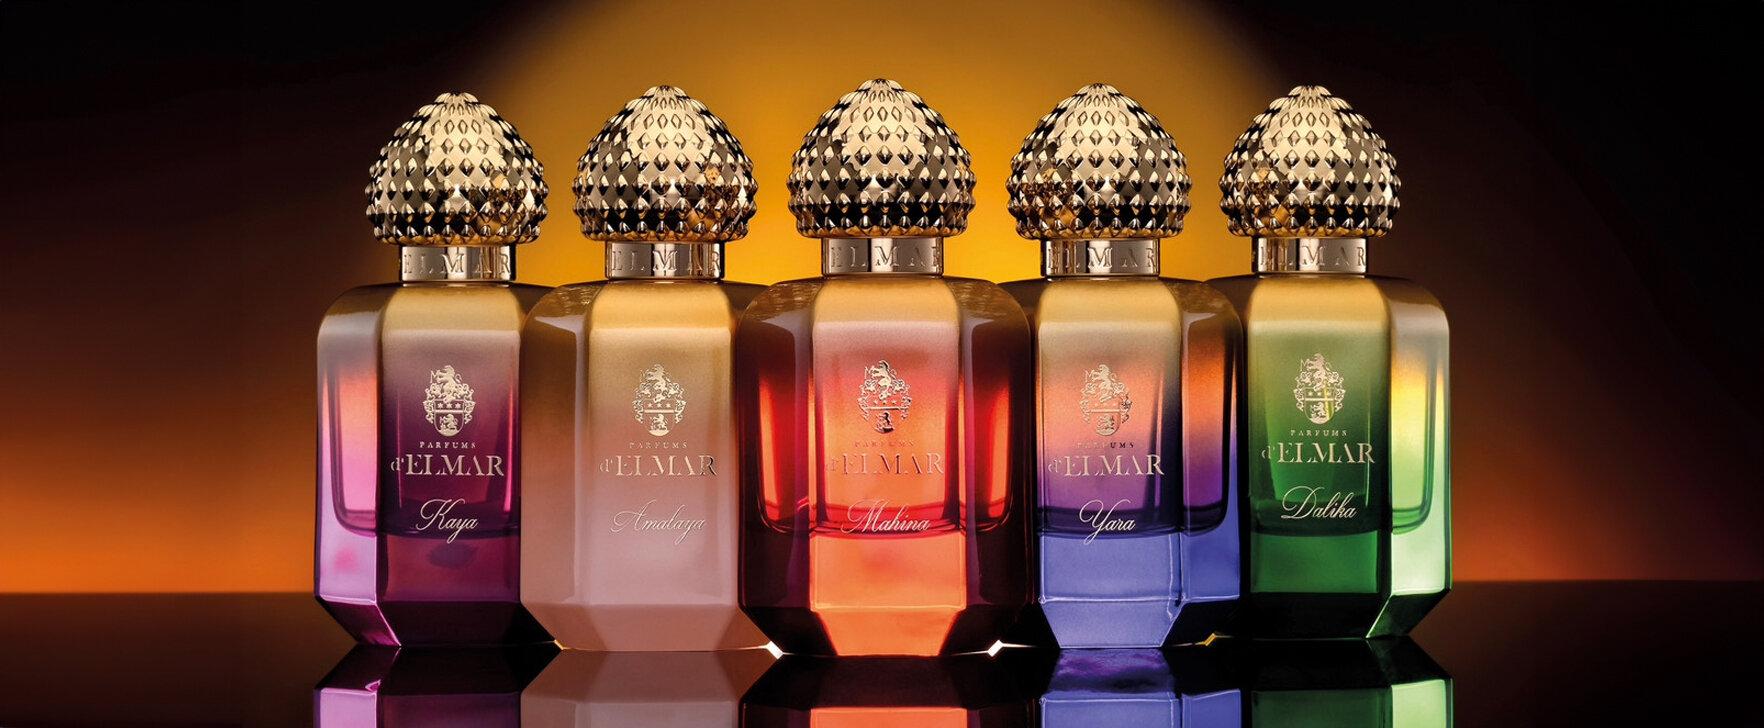 Sensual Fragrance Journeys: The New Collection From Parfums d'Elmar